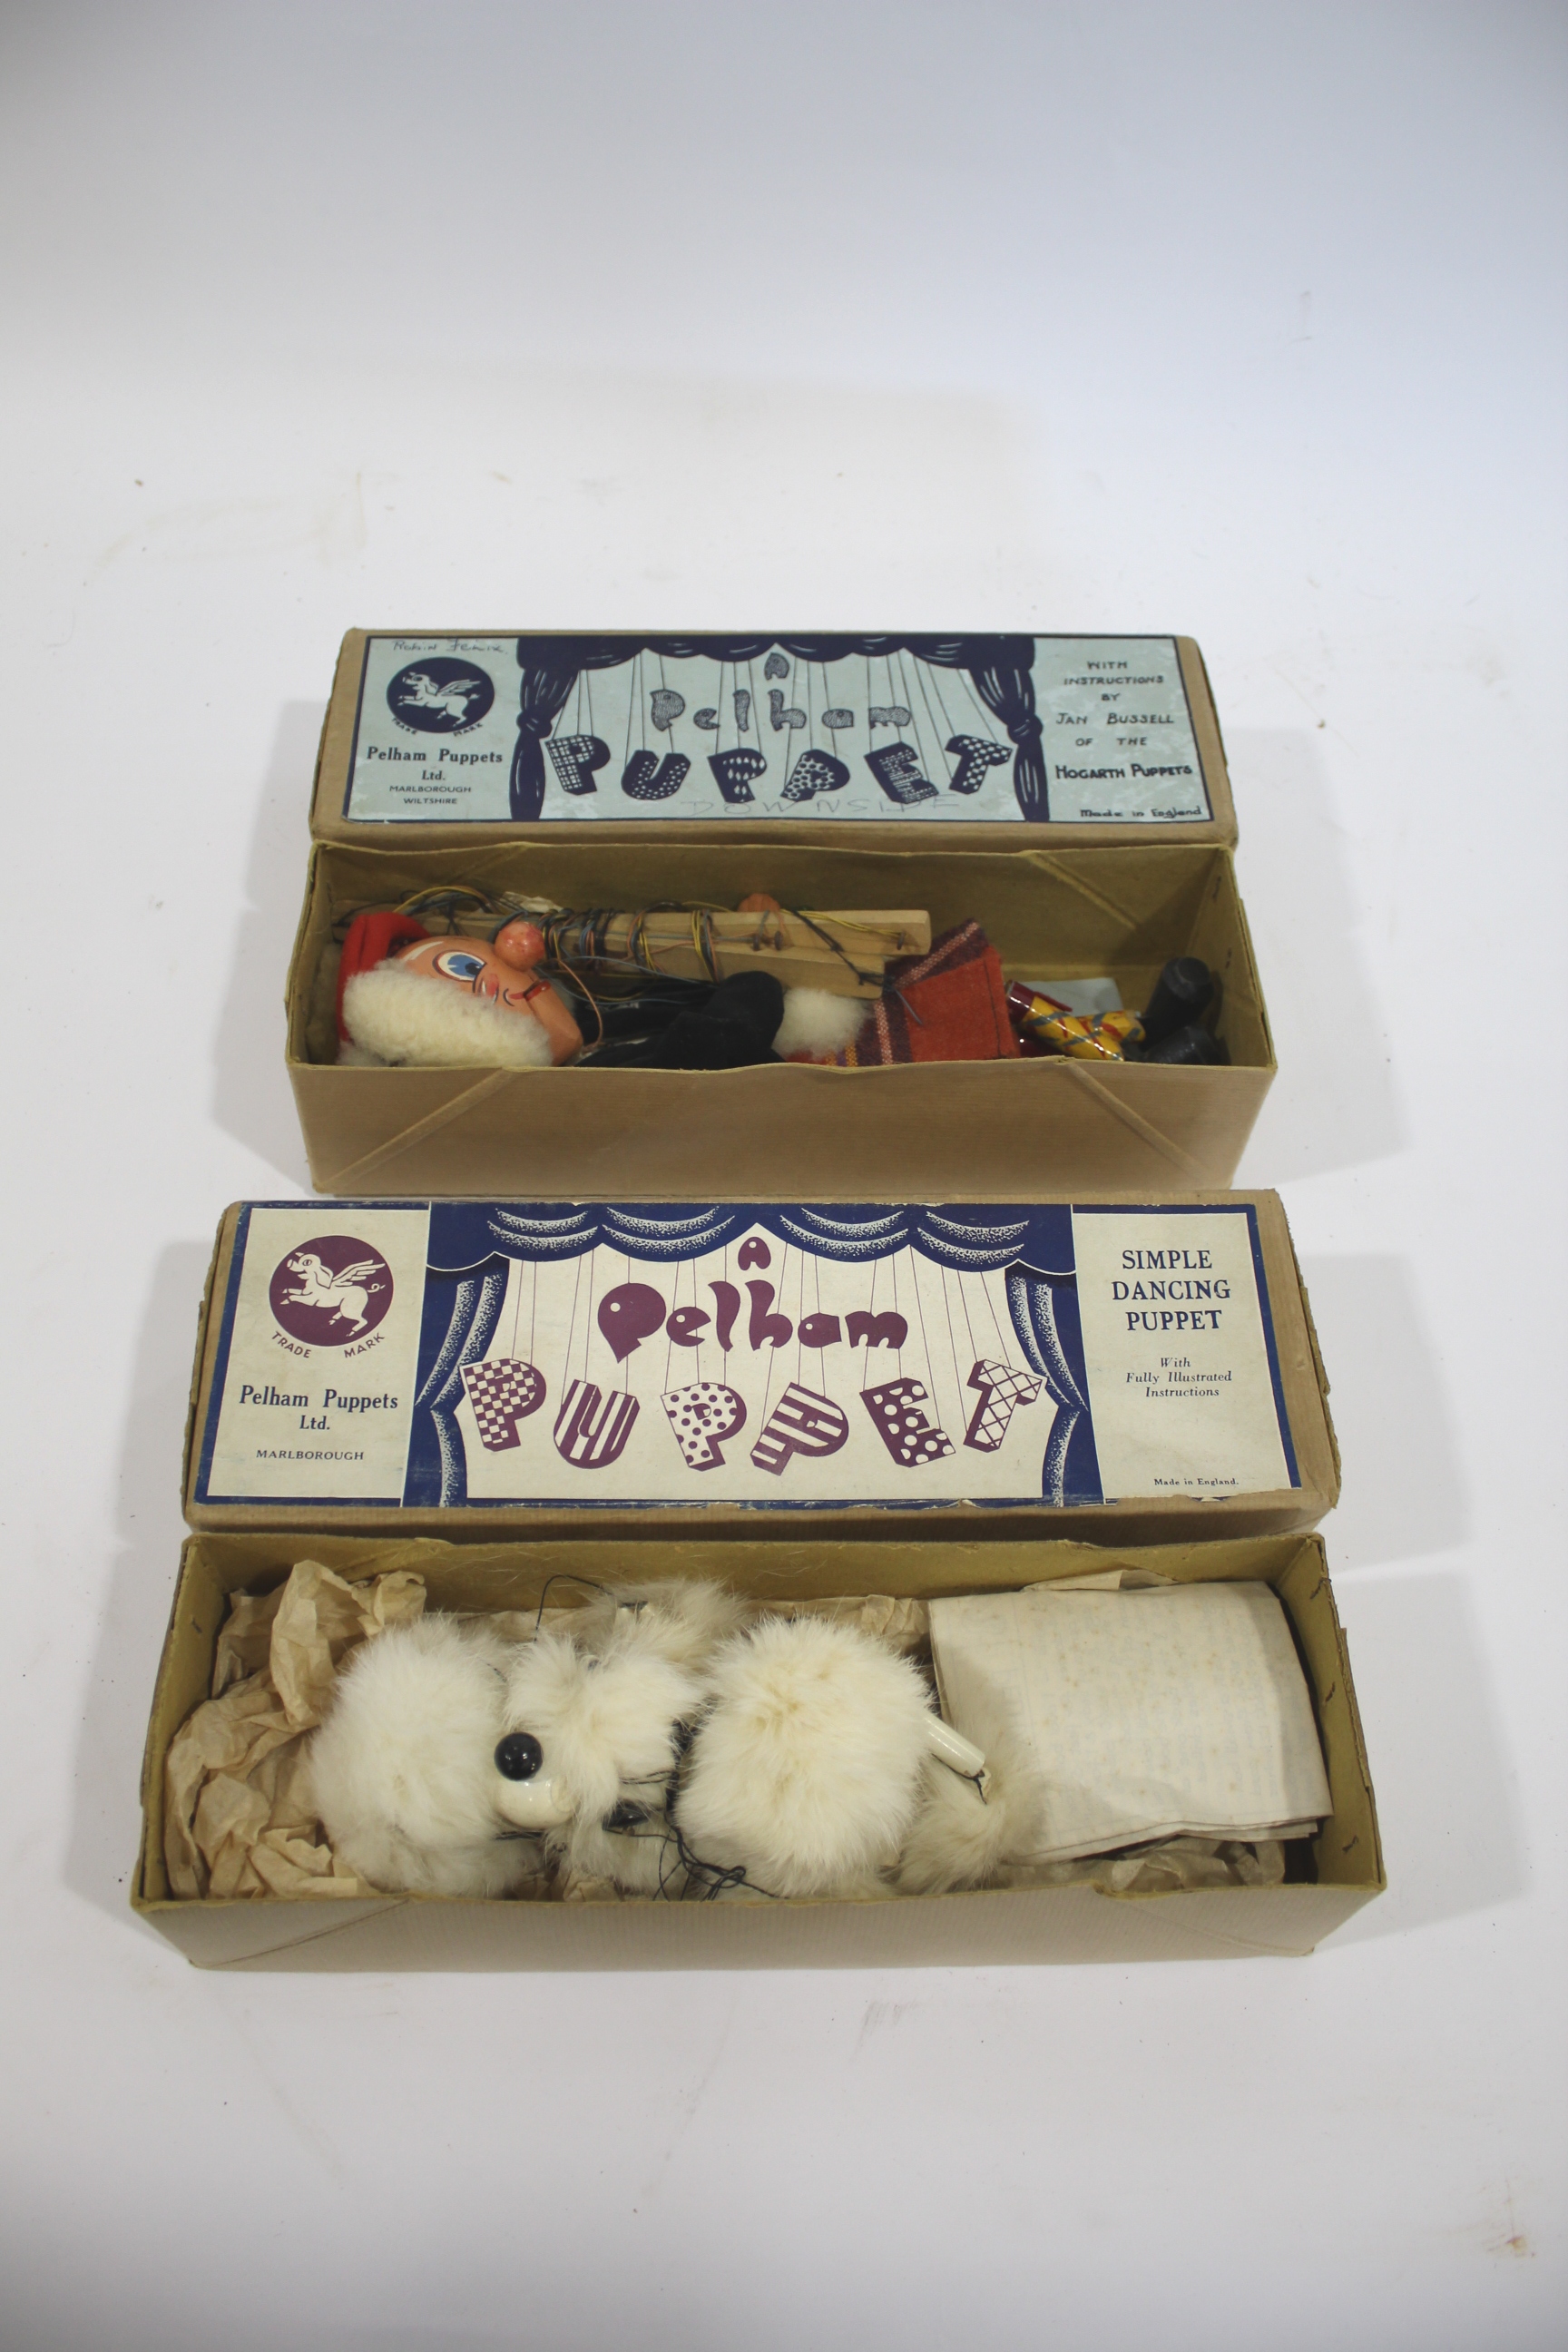 TWO BOXED PELHAM PUPPETS two early Pelham Puppets, including Macboozle and Poodle, both with their